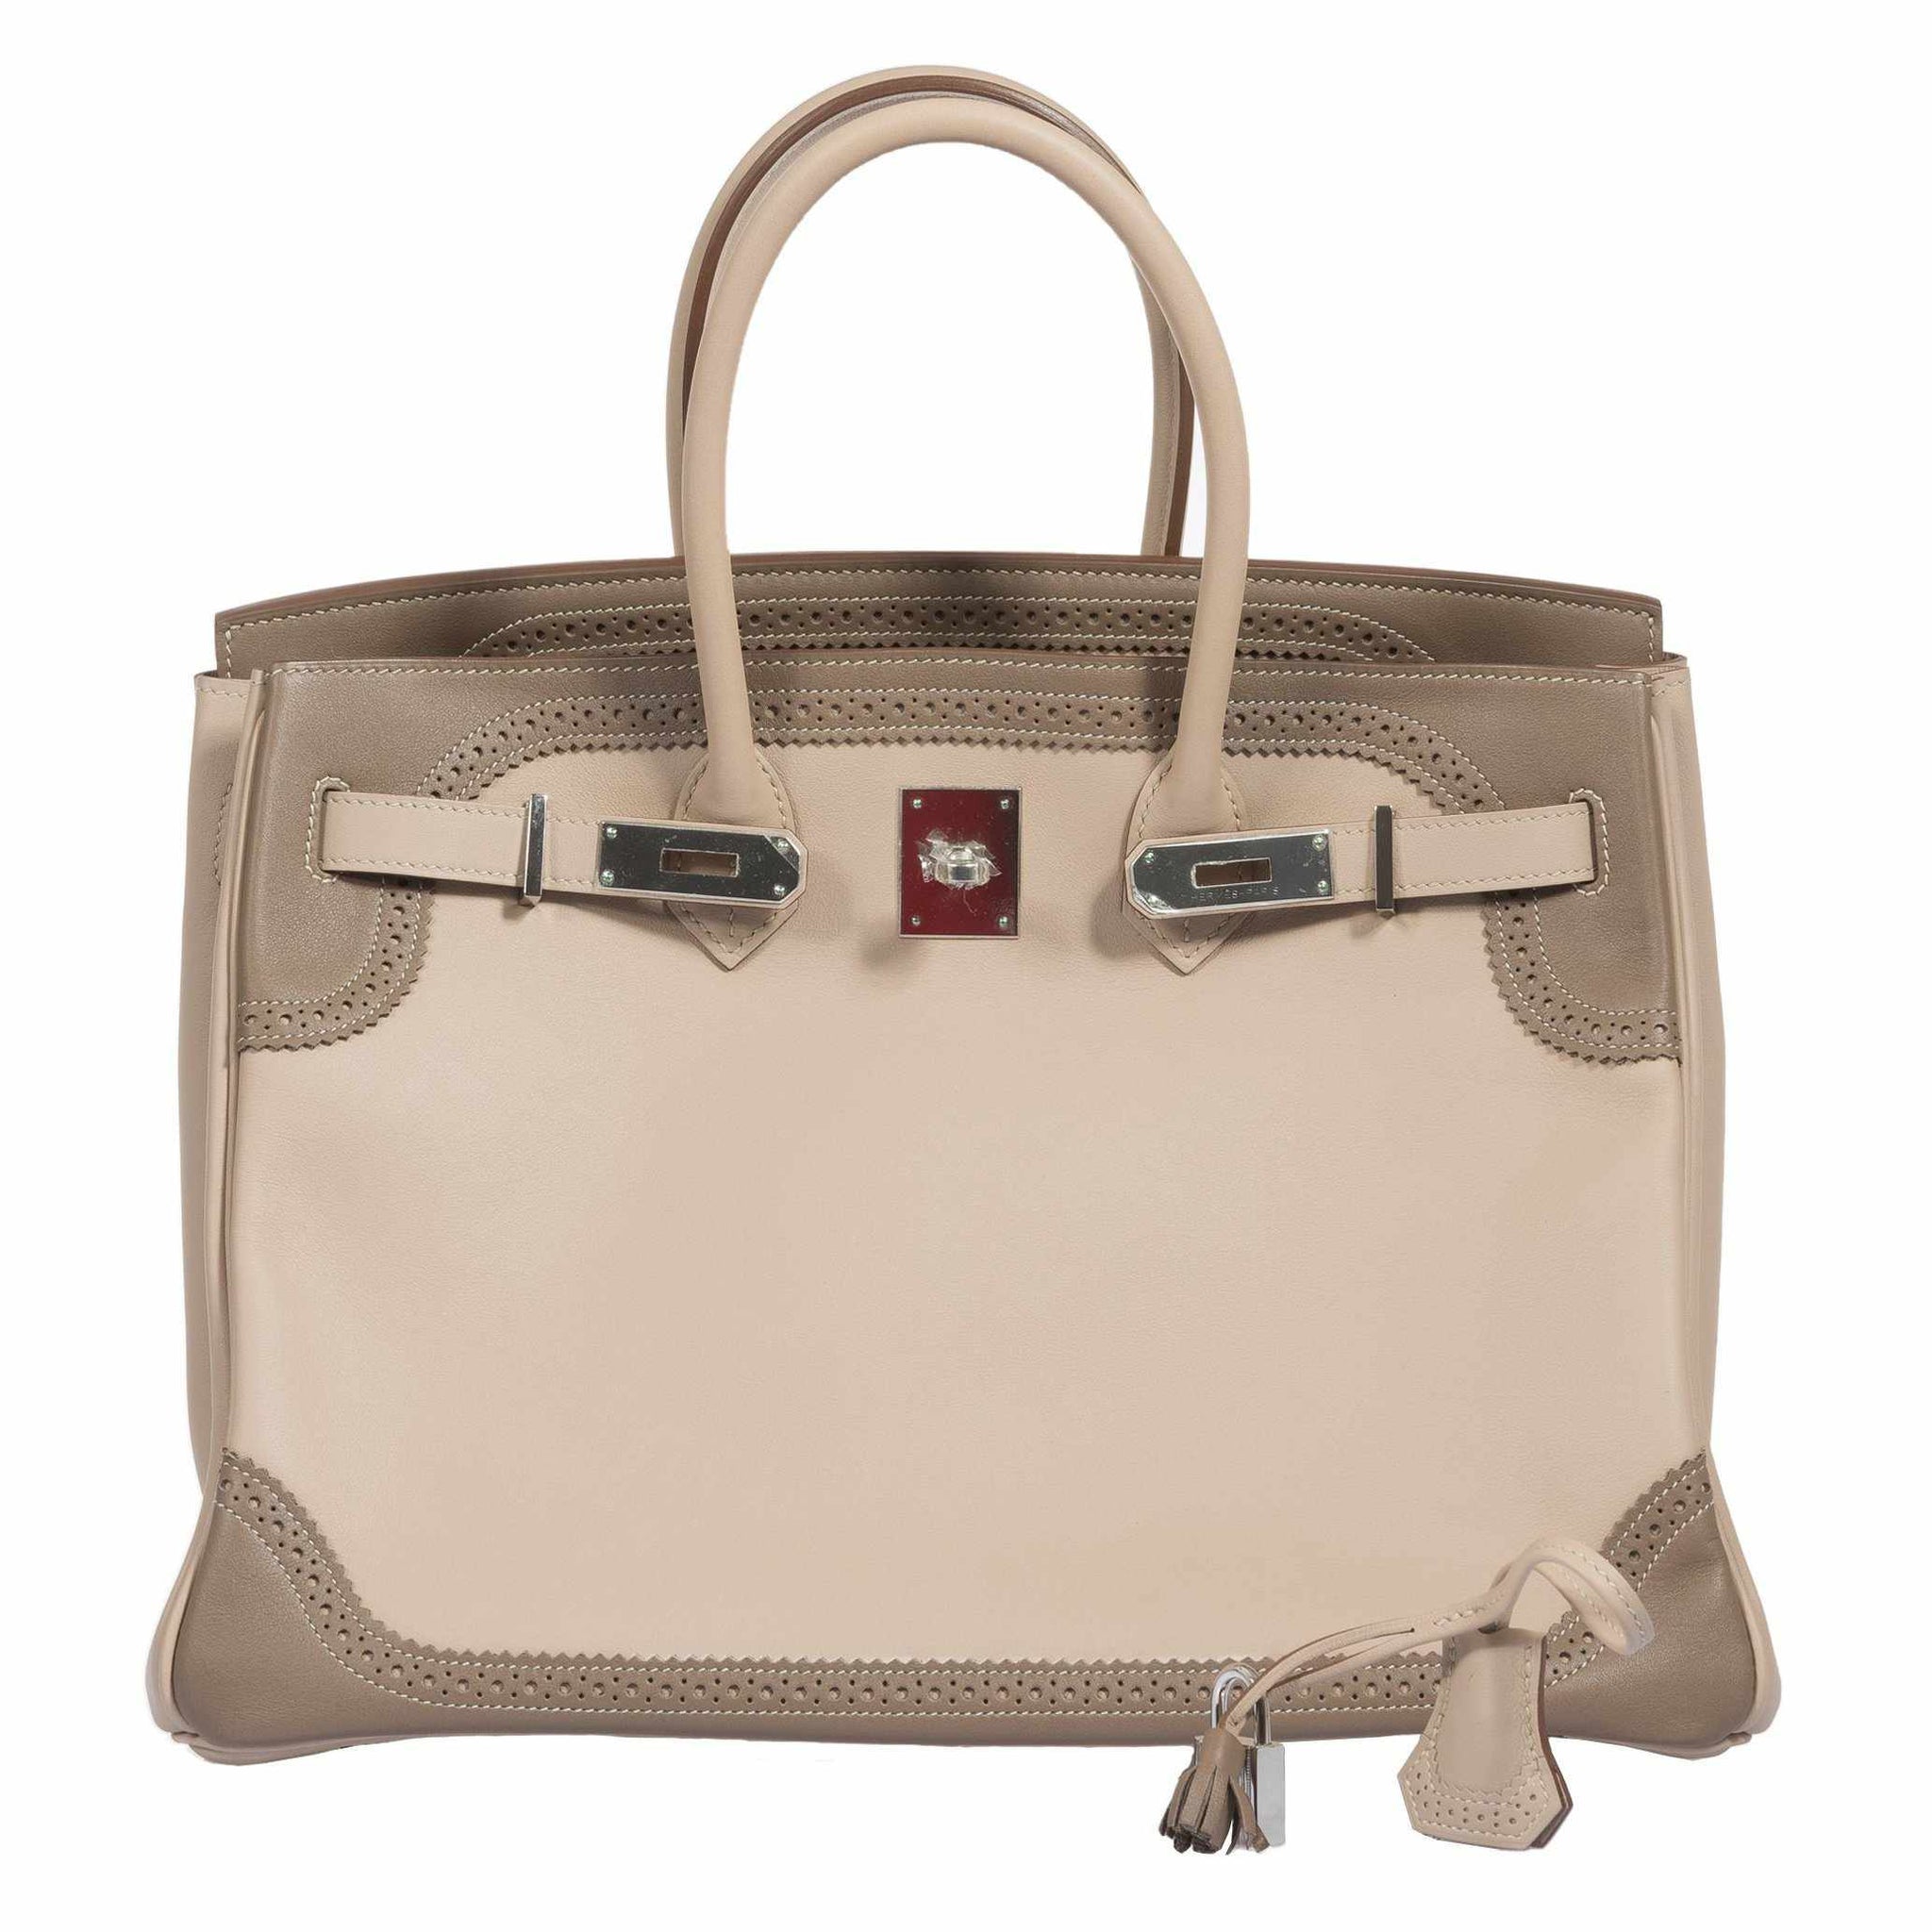 Hermes Birkin 35 Bag Grizzly Ghillies Gris Perle Gris Caillou